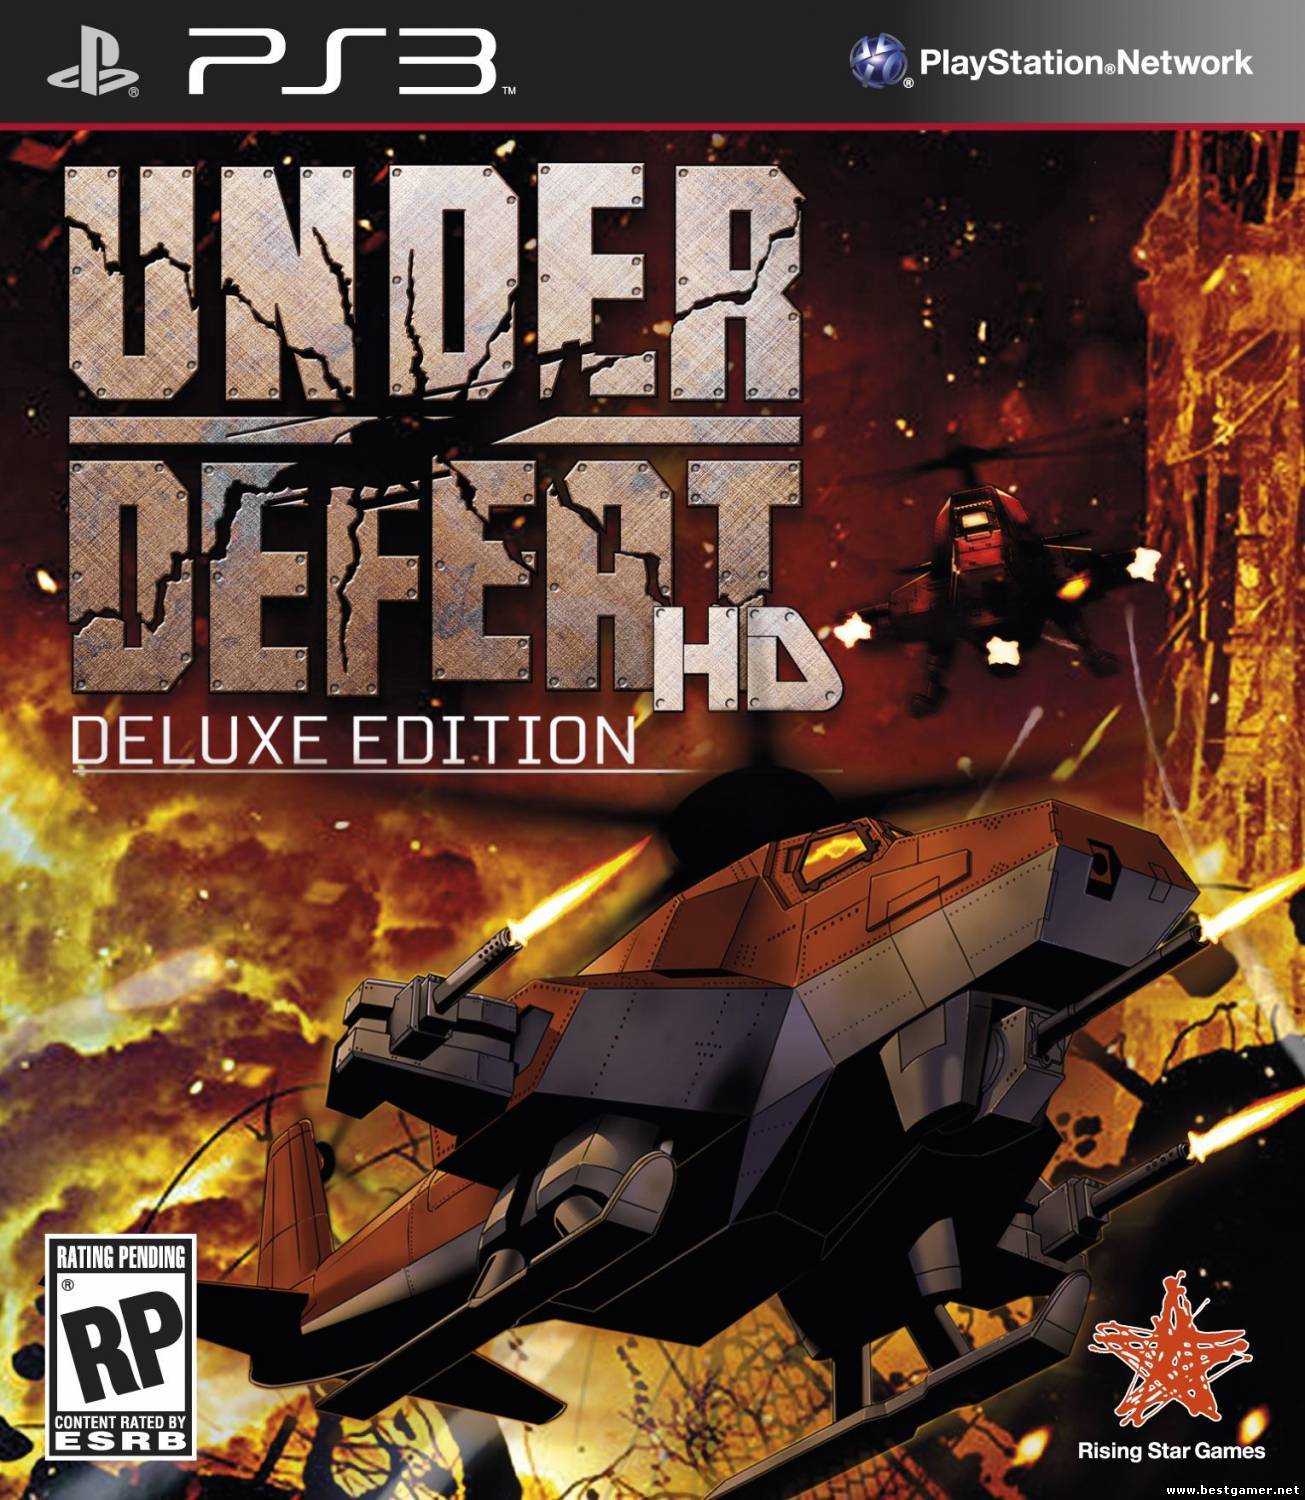 [PS3] [PSN]Under Defeat HD Deluxe Edition [3.55] [Cobra ODE / E3 ODE PRO ISO]